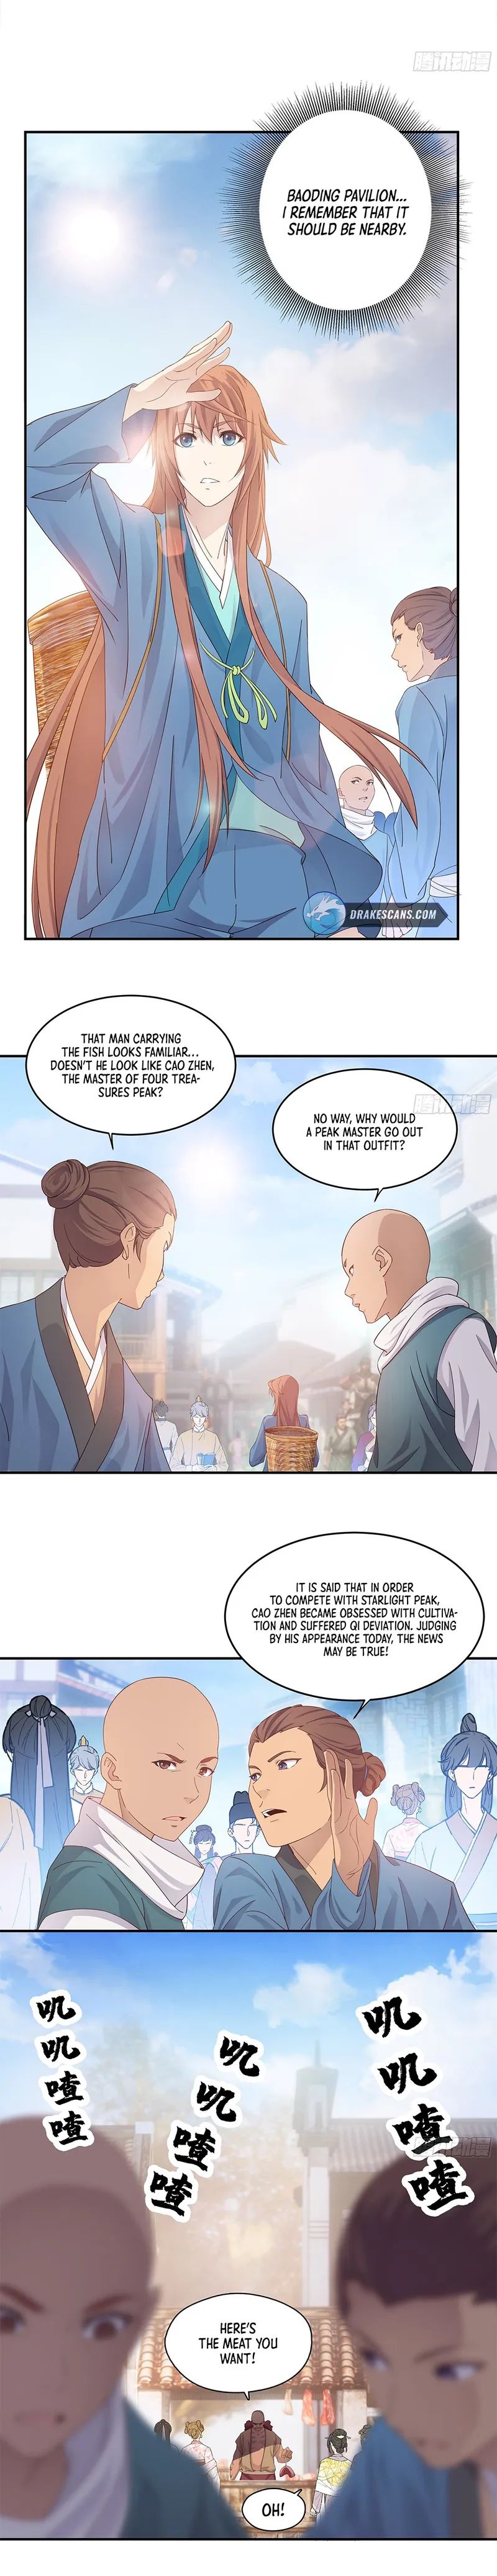 My Master Knows Everything - Page 2